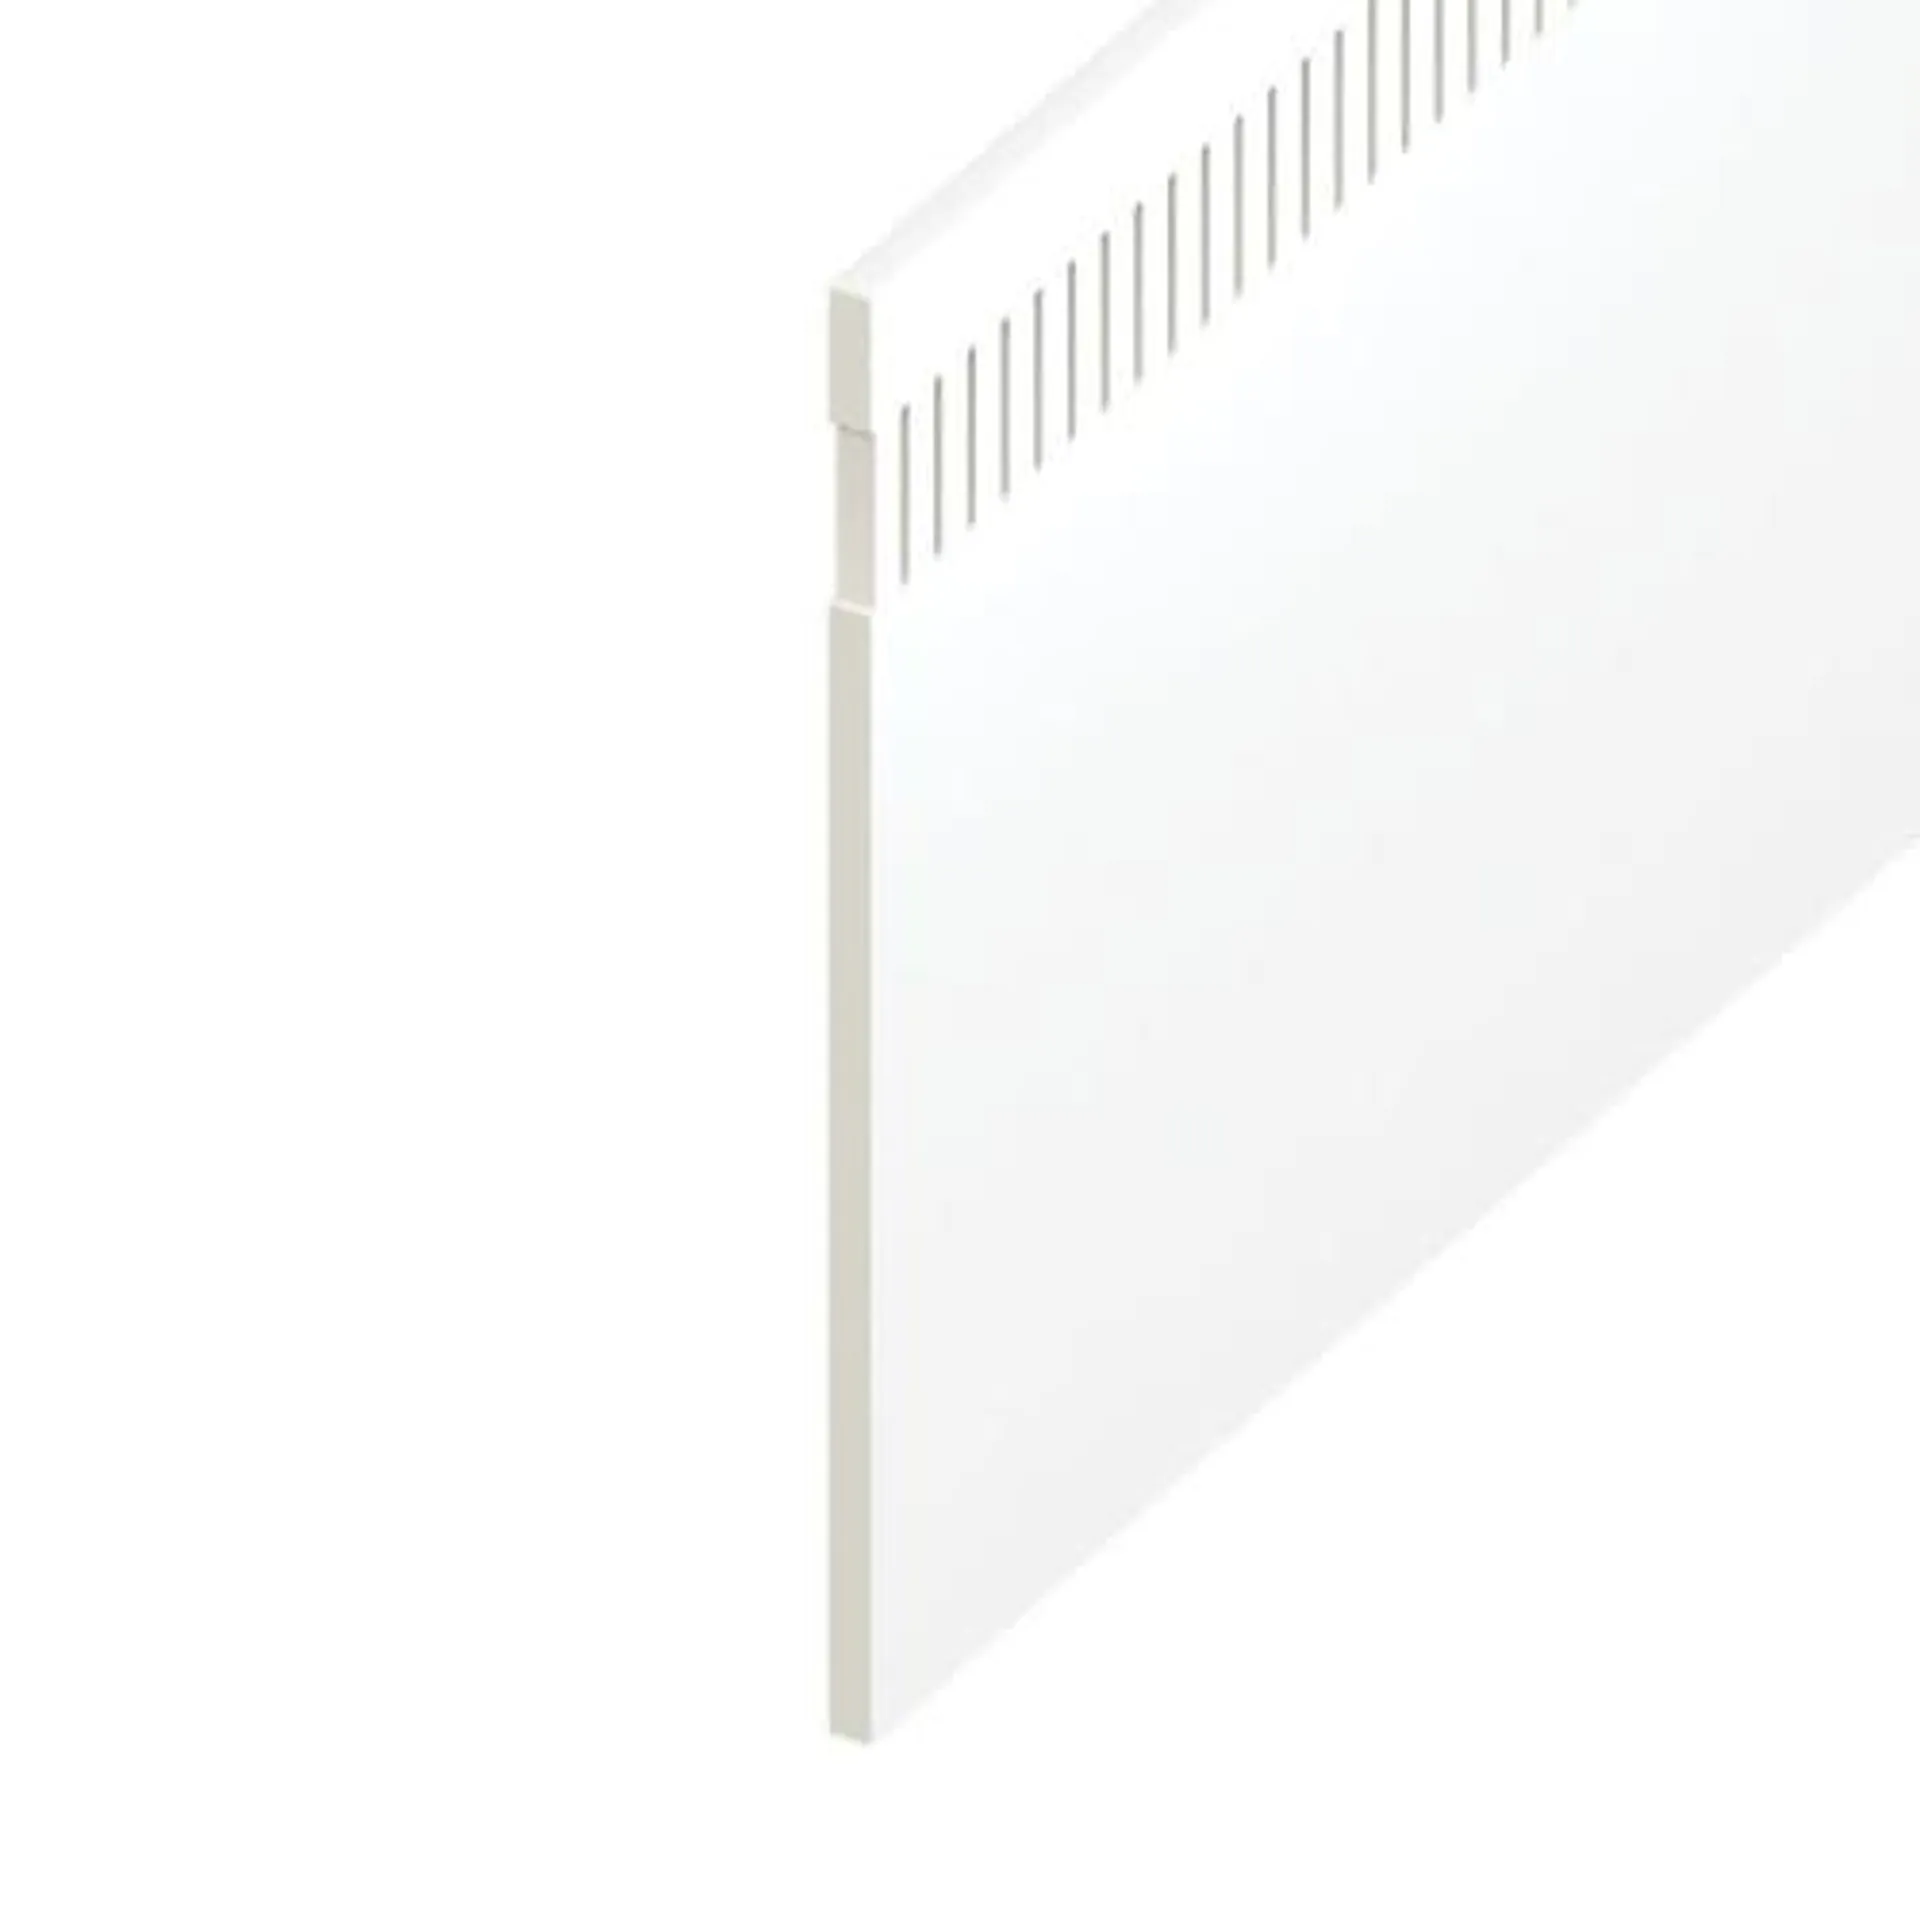 Wickes PVCu White Soffit Reveal Liner Vented - 175mm x 9mm x 3m